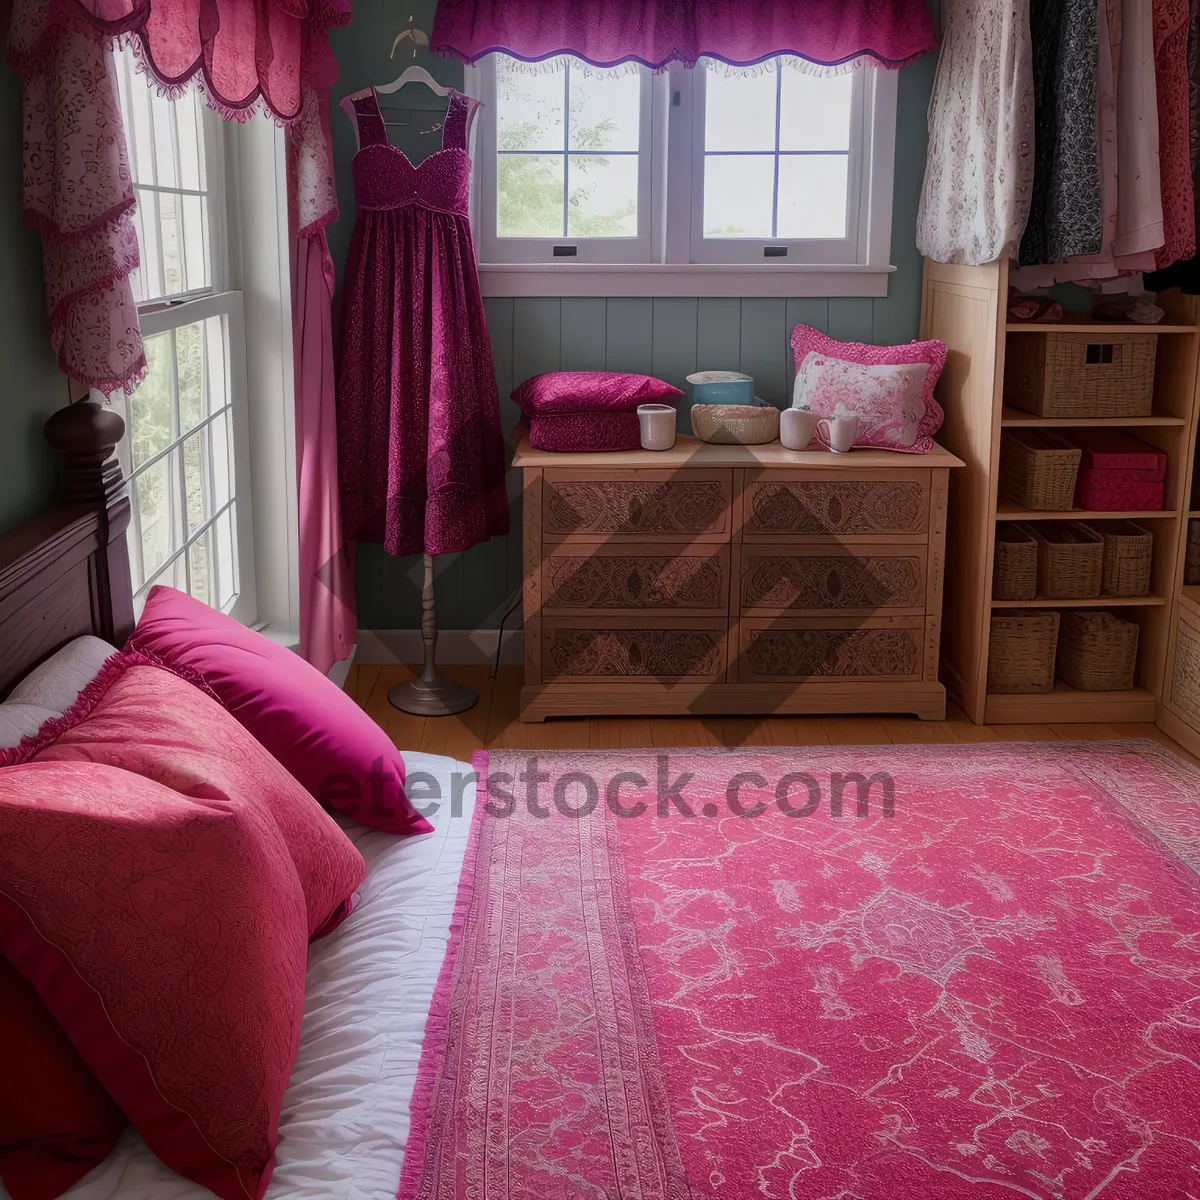 Picture of Cozy bedroom with modern furniture and elegant decor